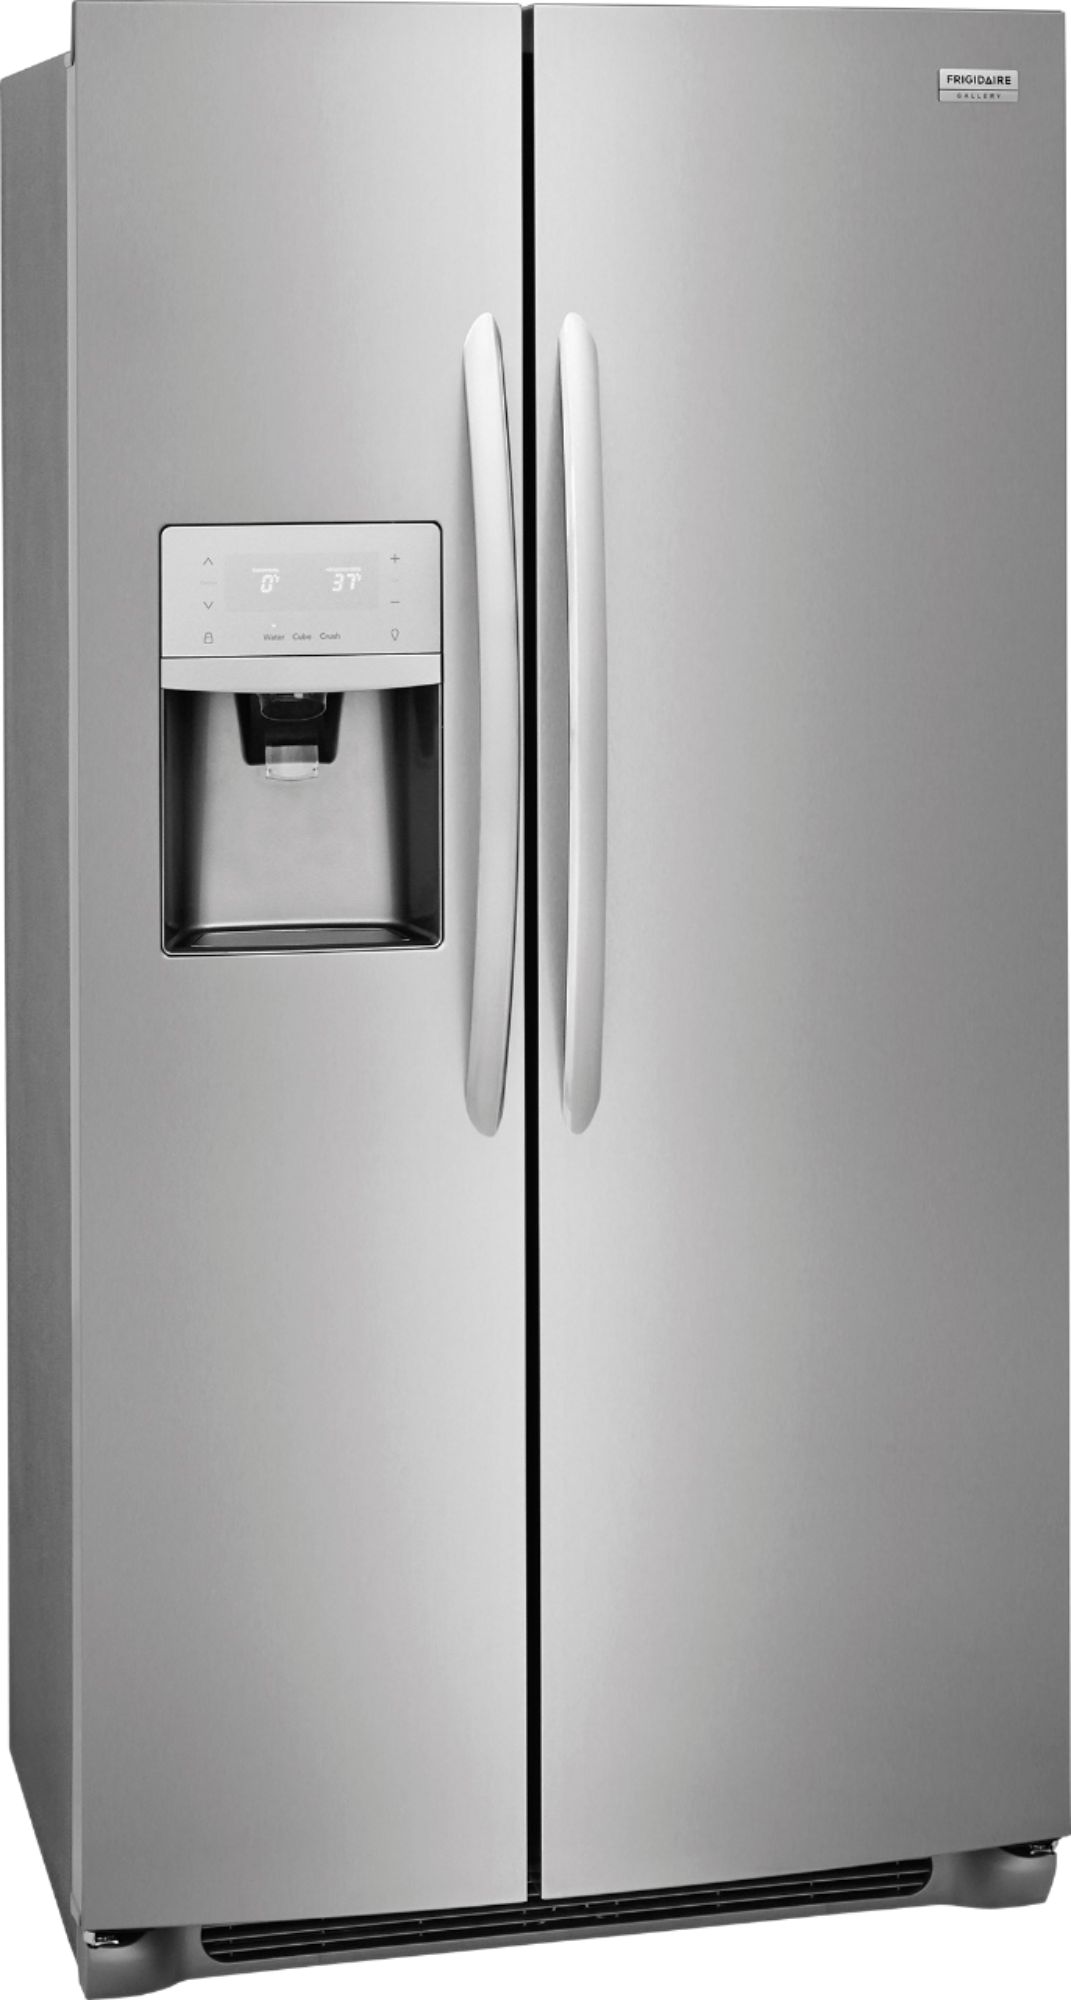 Left View: Frigidaire - 22.2 Cu. Ft. Counter-Depth Side-by-Side Refrigerator - Stainless steel